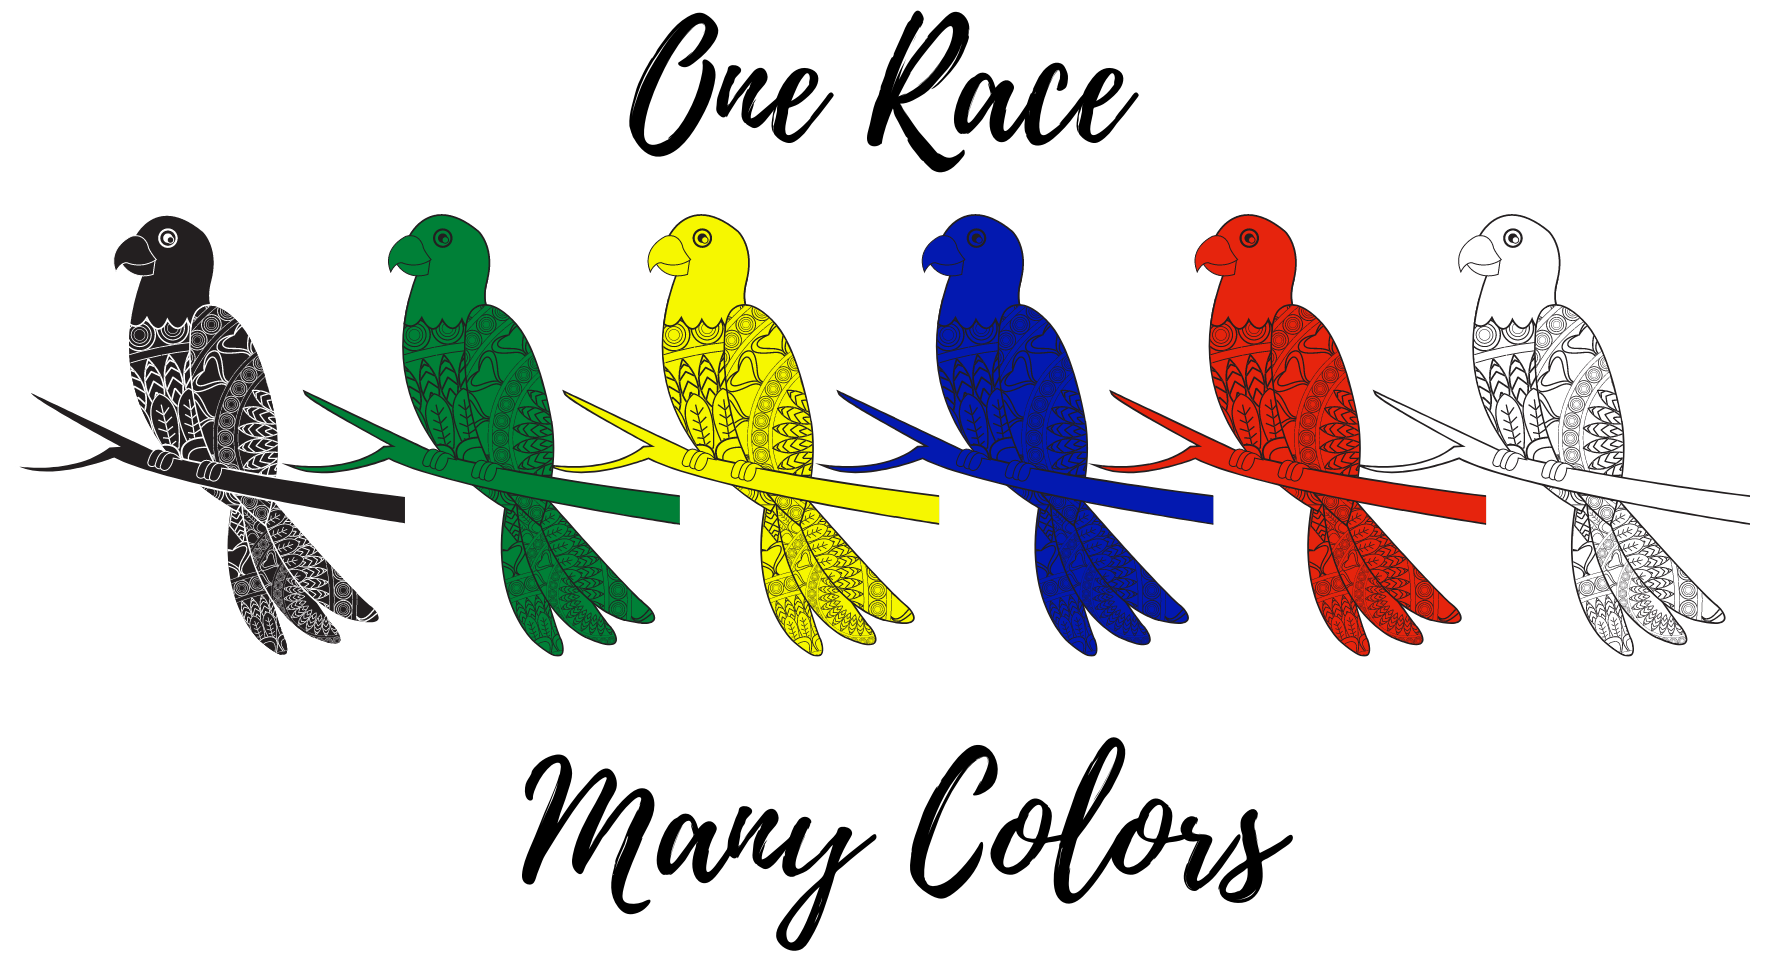 One Race Many Colors